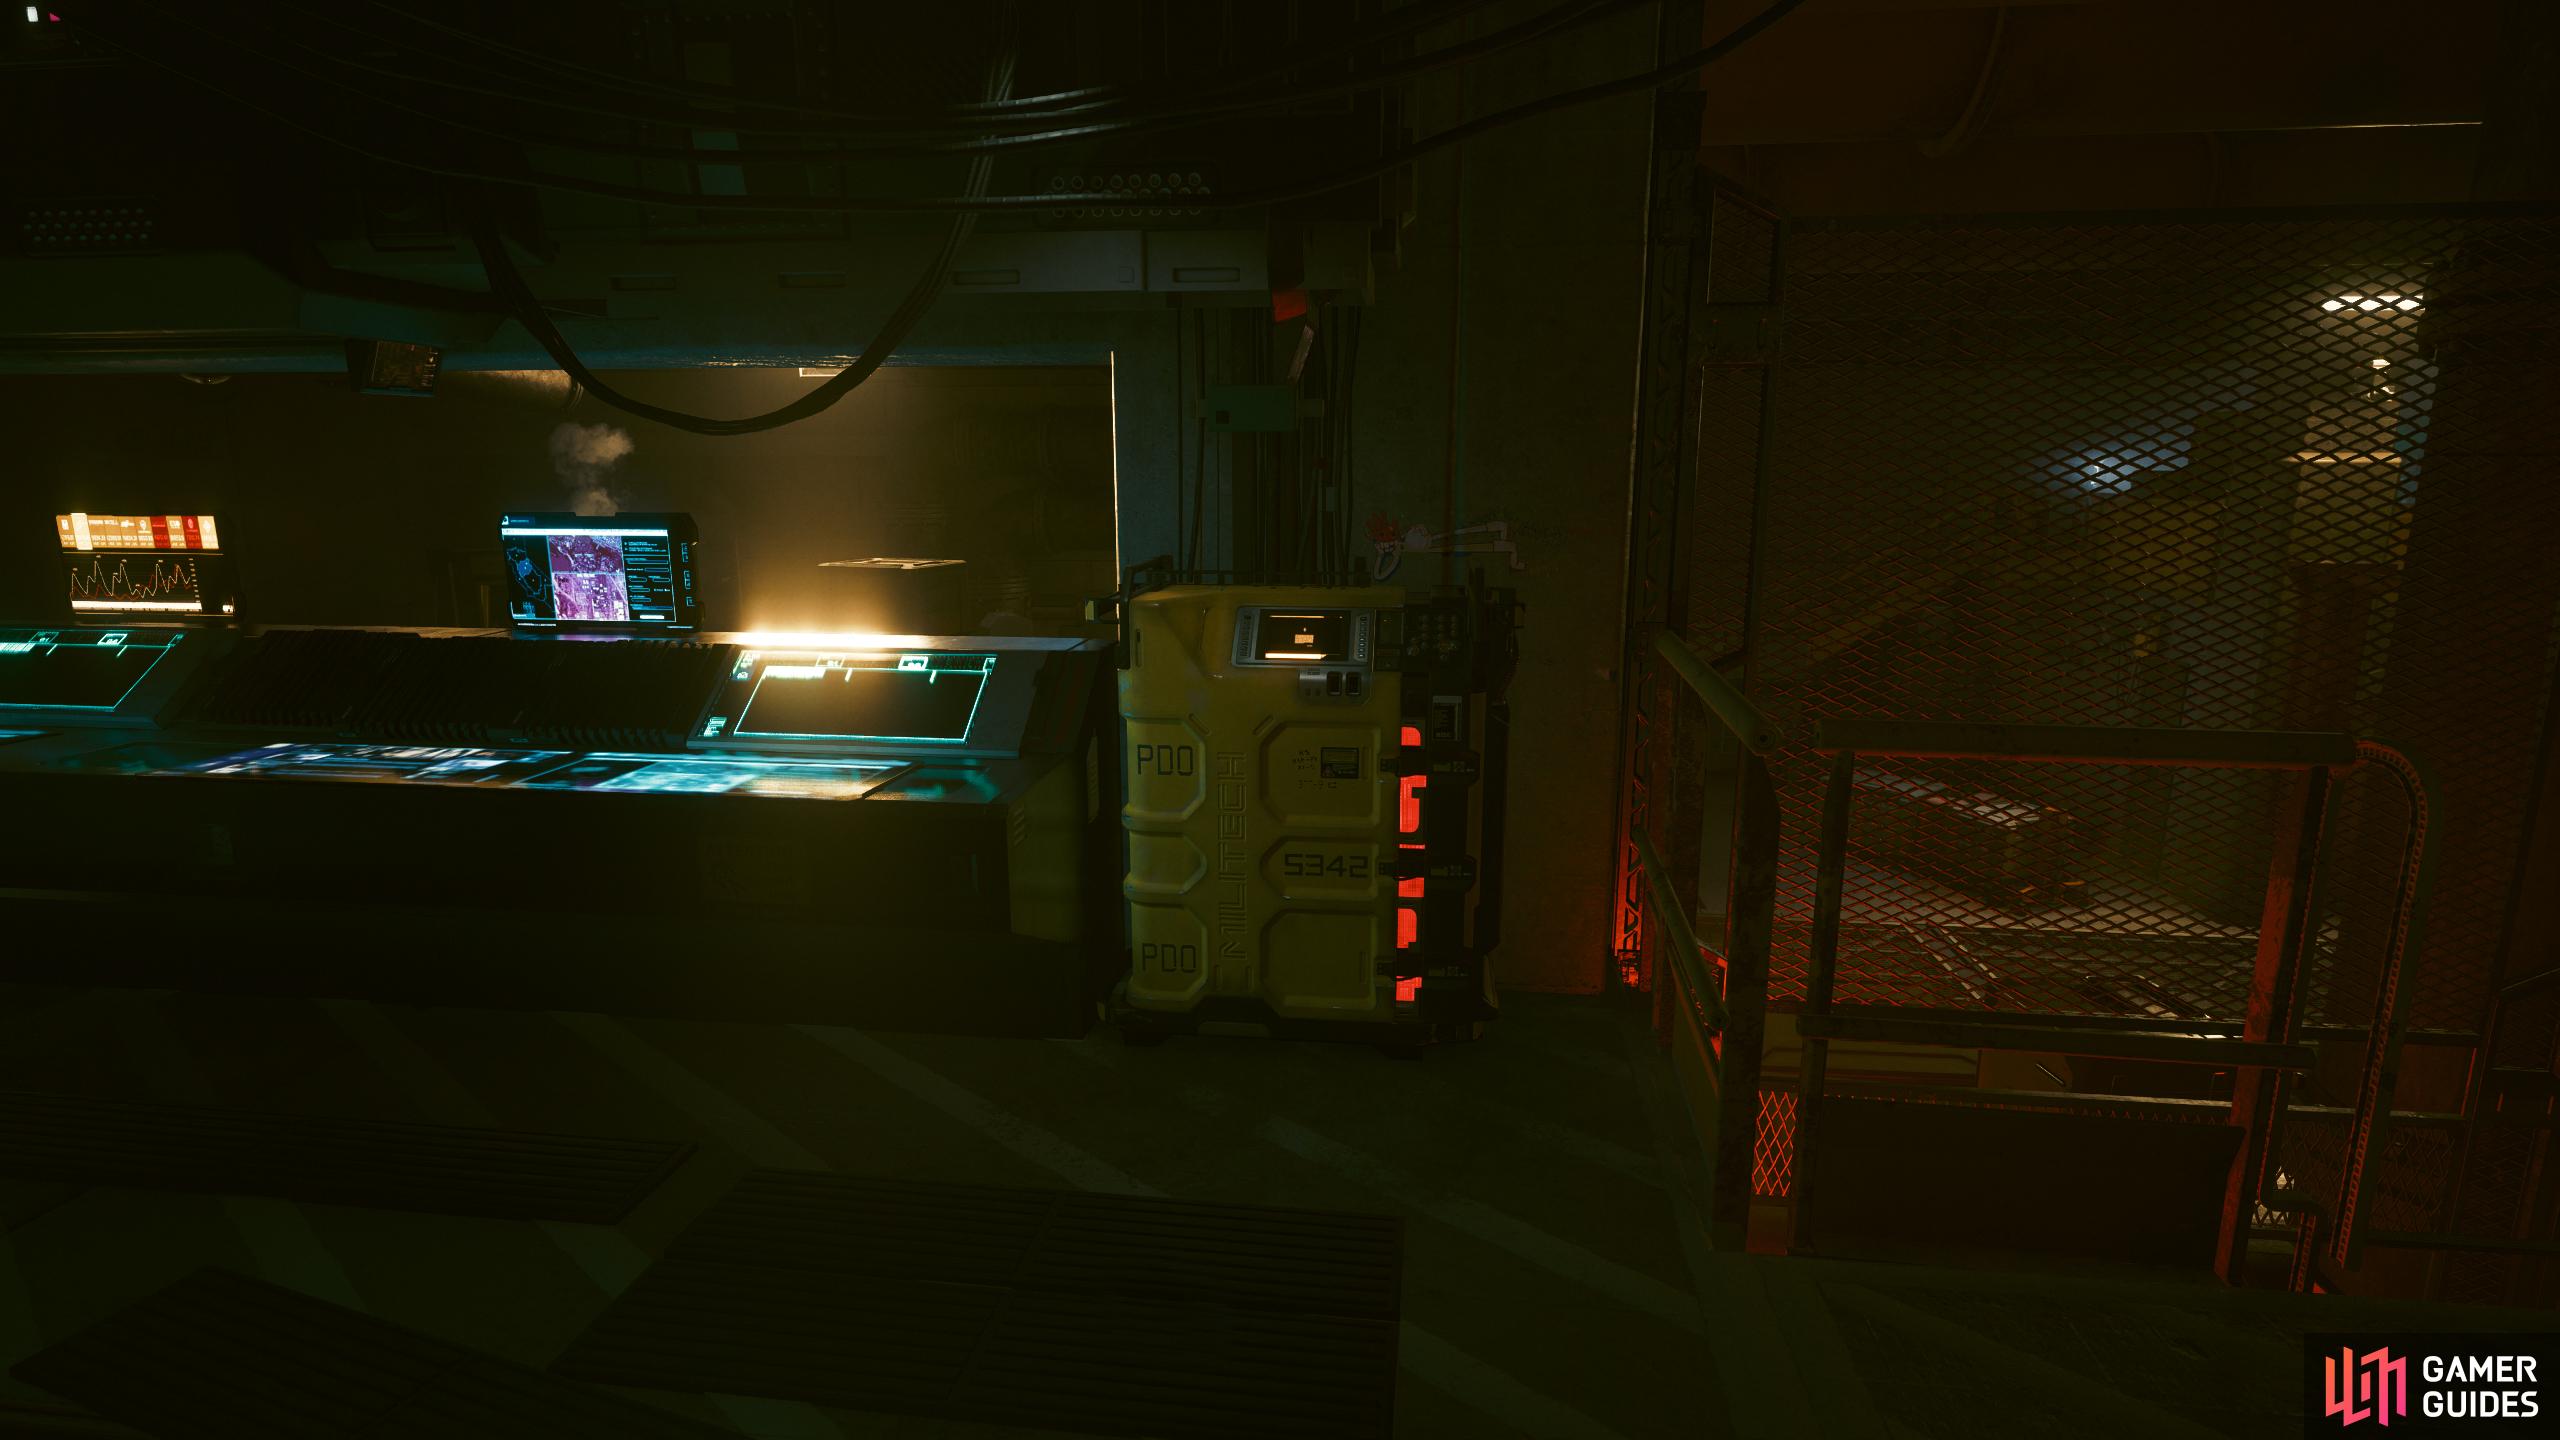 In Phantom Liberty, you can earn Relic Skill Points by connecting to the Militech Data Terminals hidden around Dogtown.